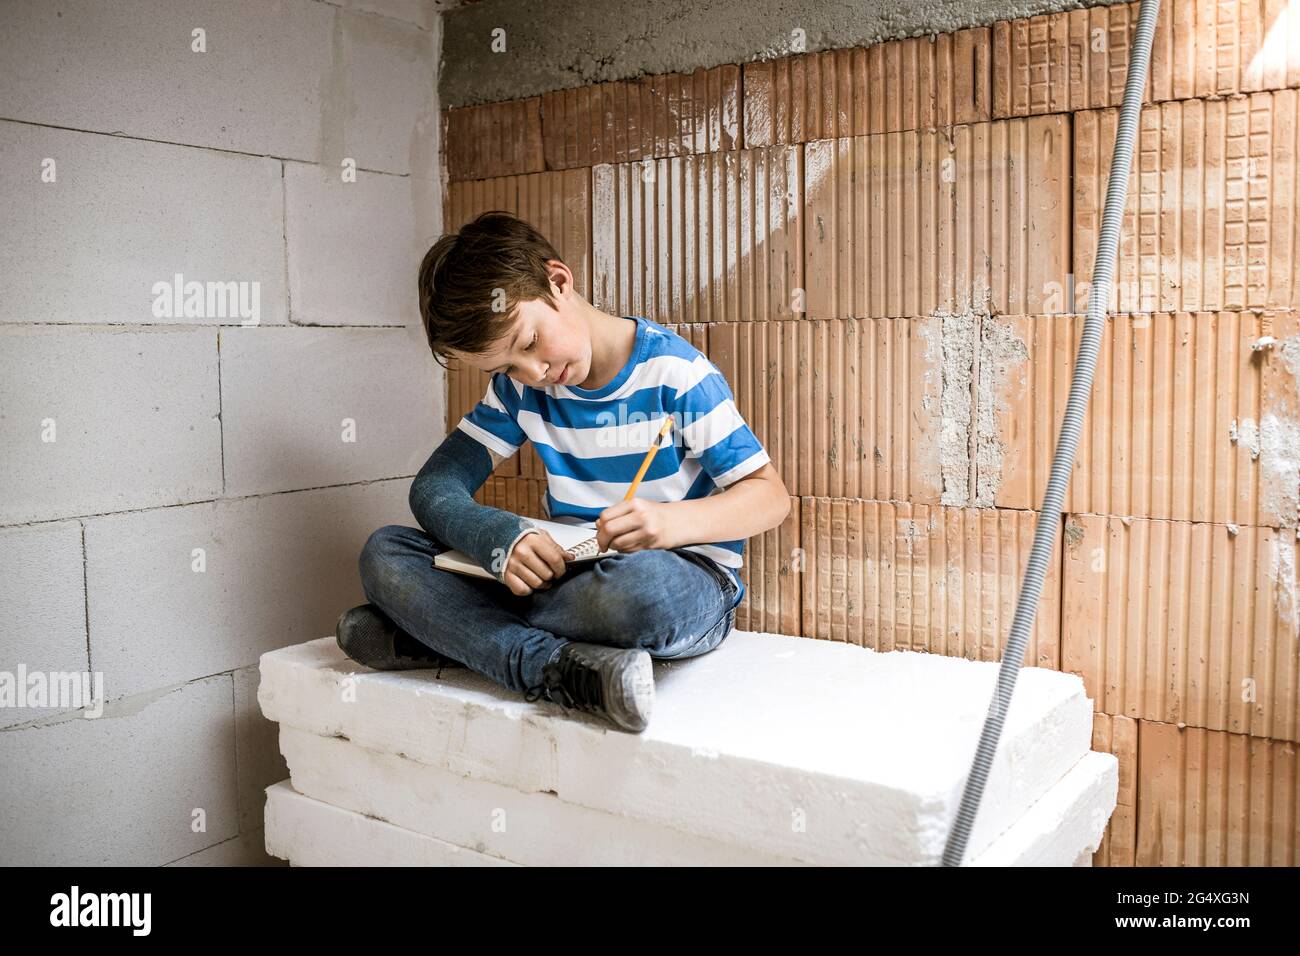 Boy with broken arm writing in book while sitting on block during renovation Stock Photo